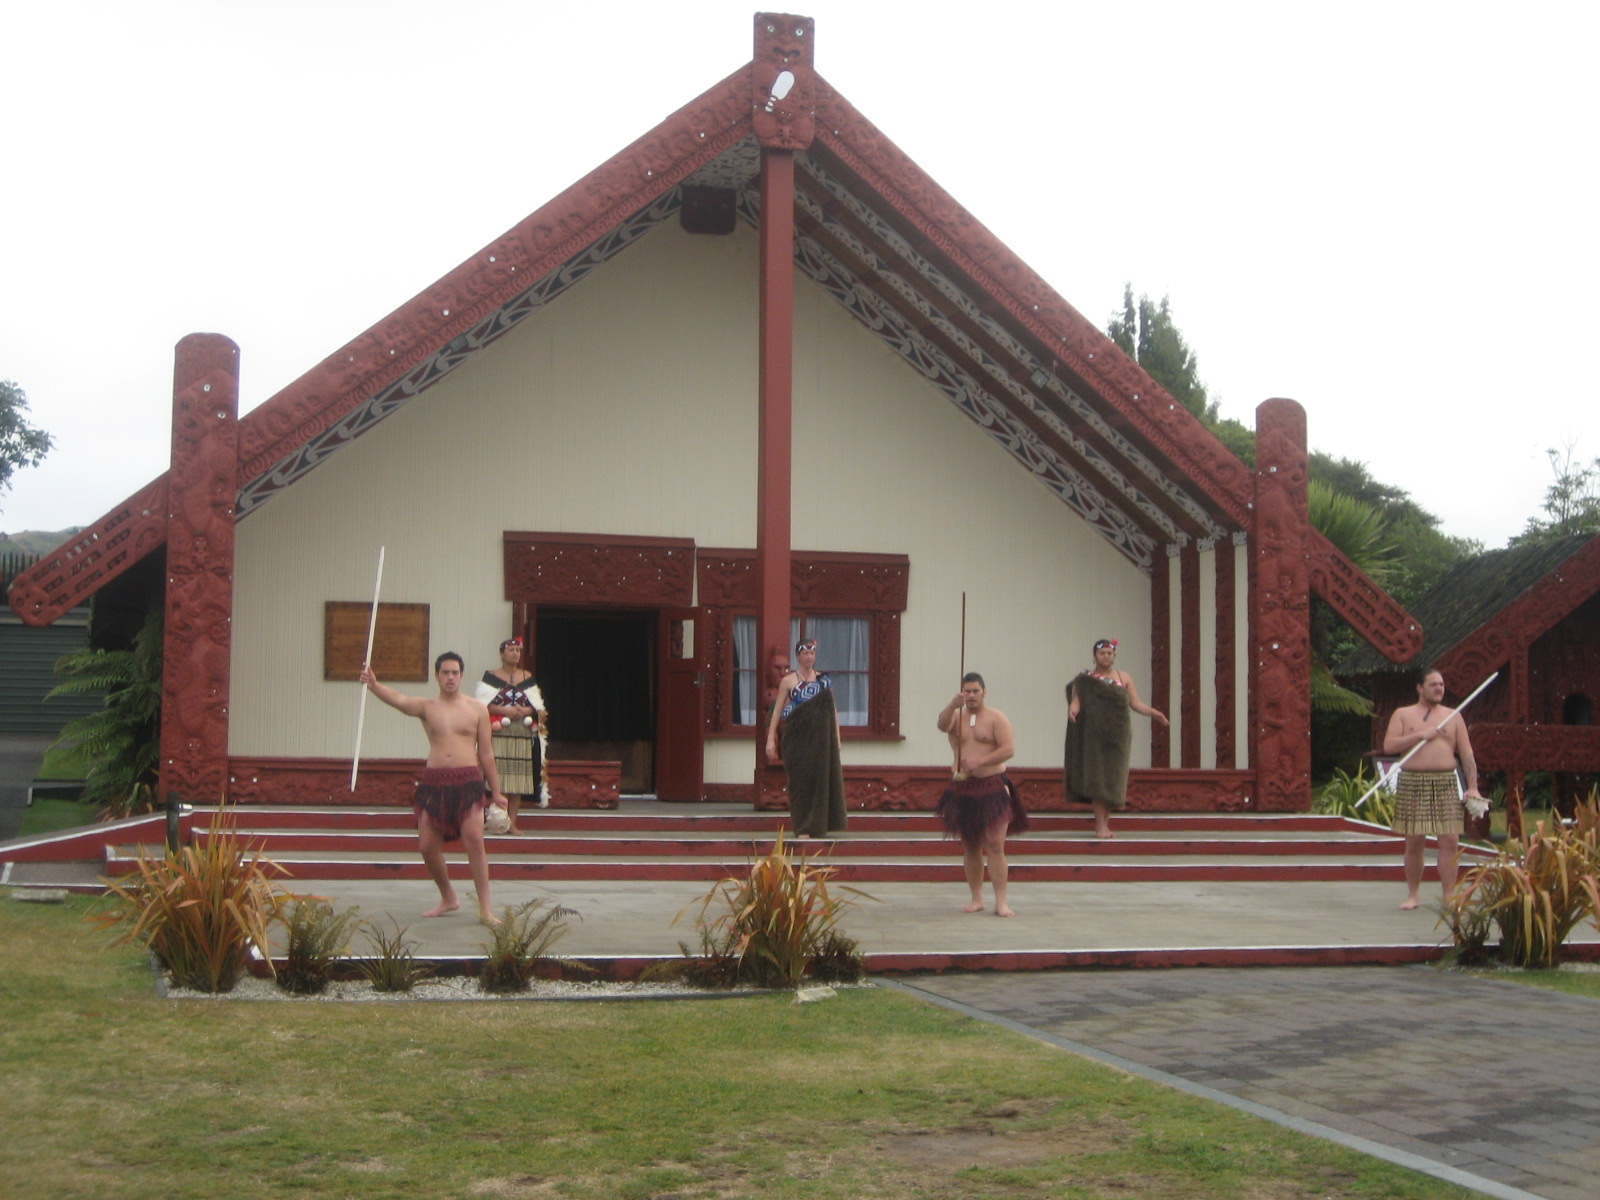 Sample Maori meeting hall - being greeted when we arrived